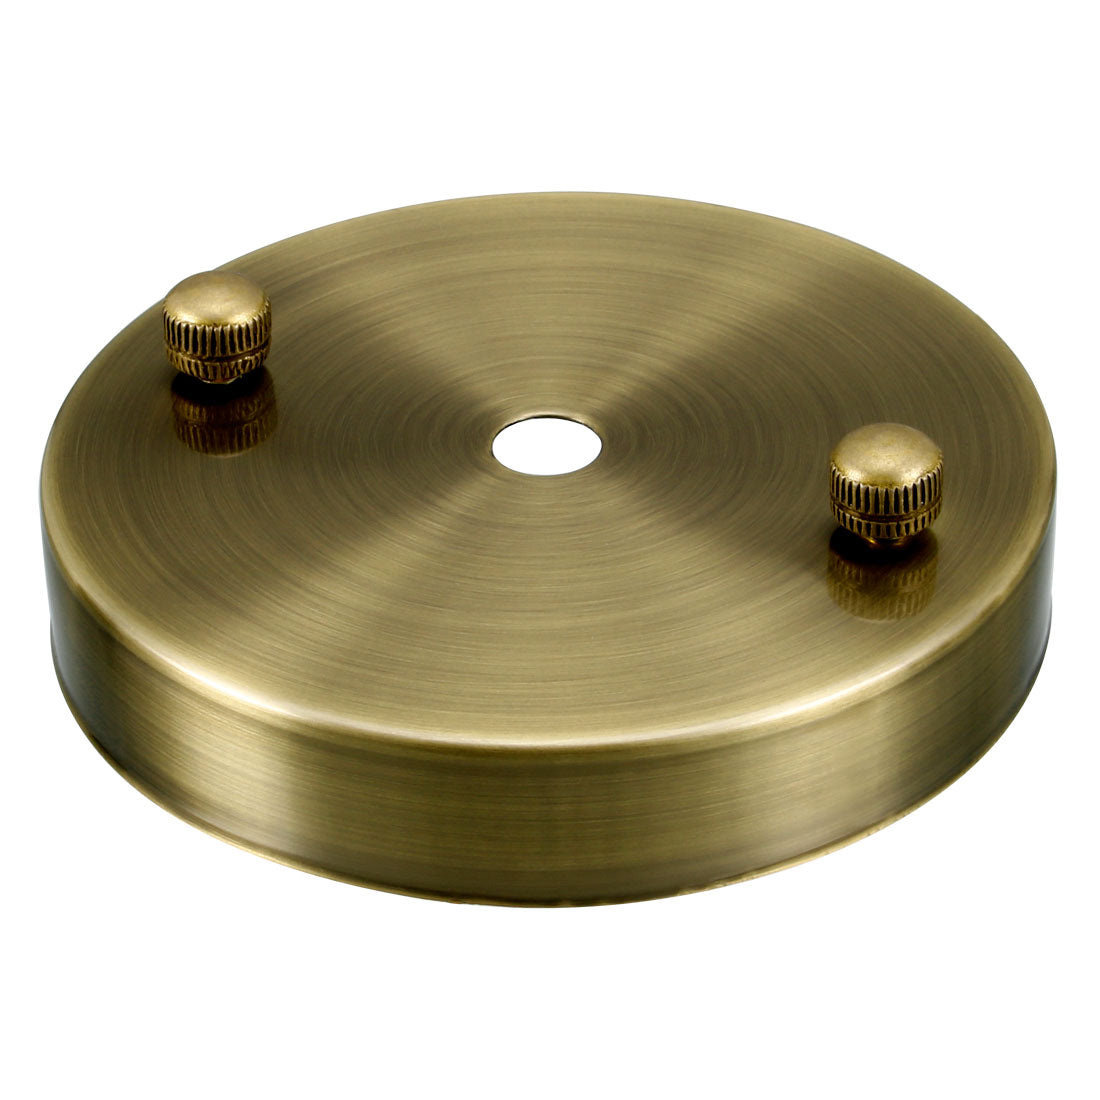 uxcell Uxcell Retro Ceiling Light Plate Pointed Base Chassis Disc Pendant Accessories 100mmx20mm Bronze w Screw 3pcs